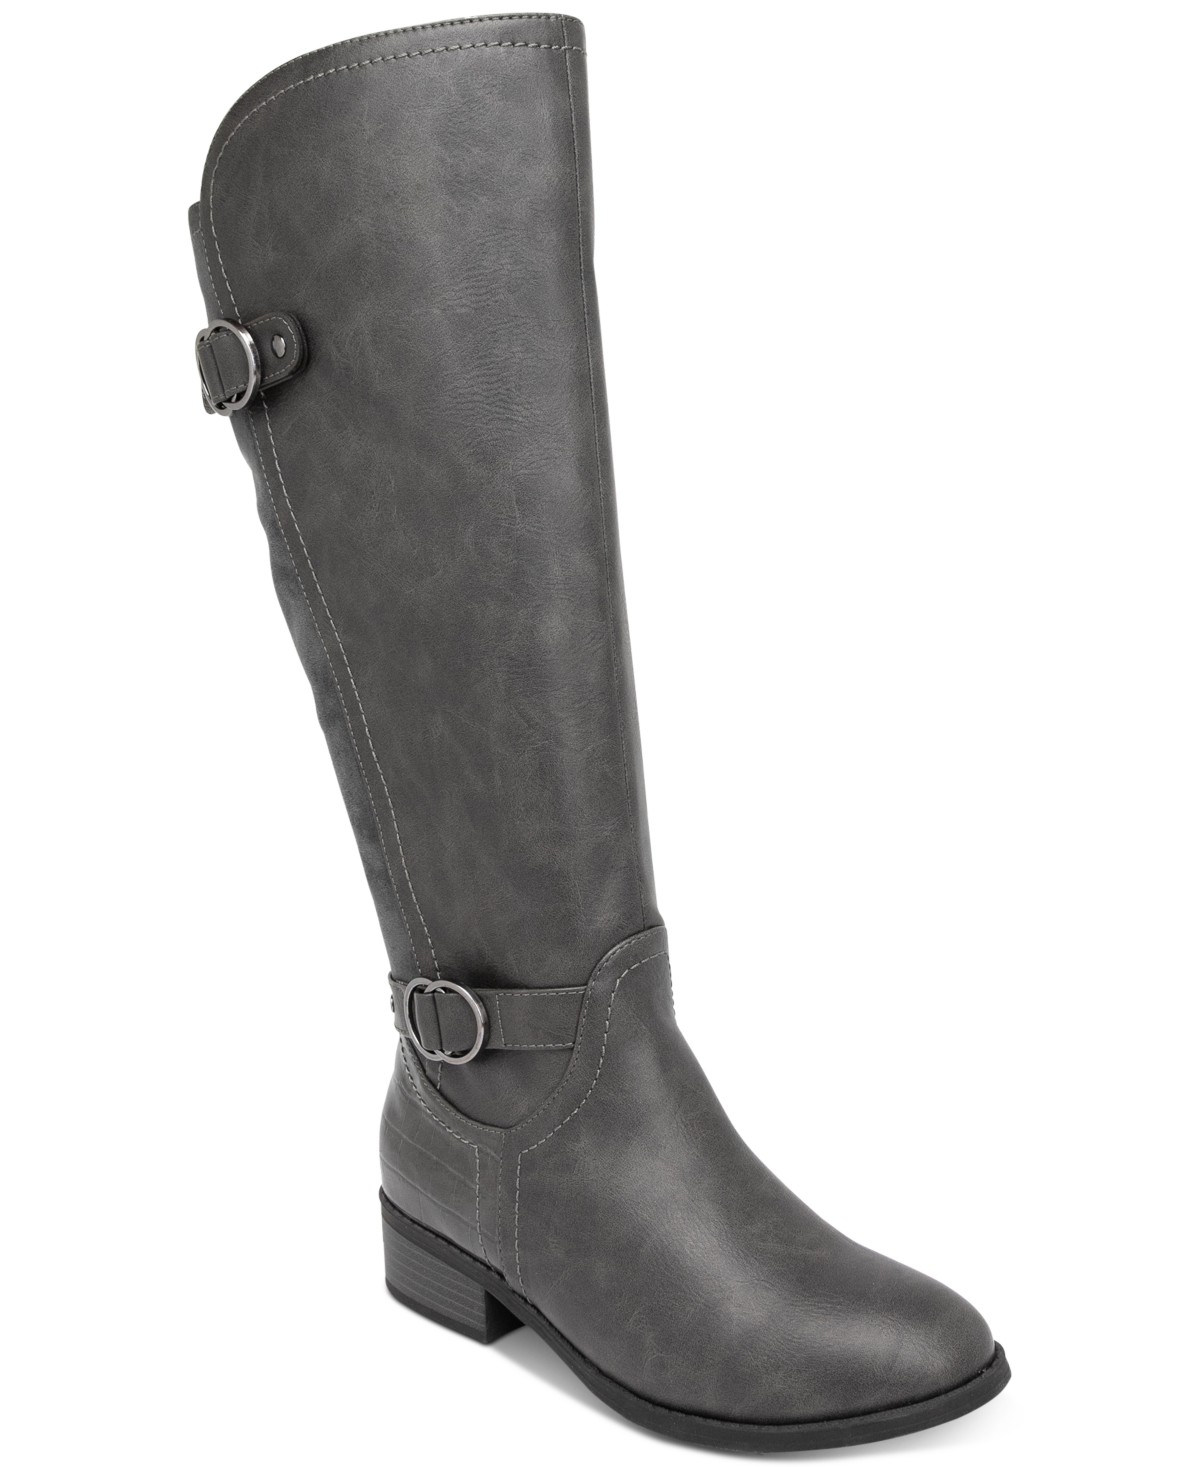 Leandraa Extra Wide-Calf Riding Boots, Created for Macy's - Grey